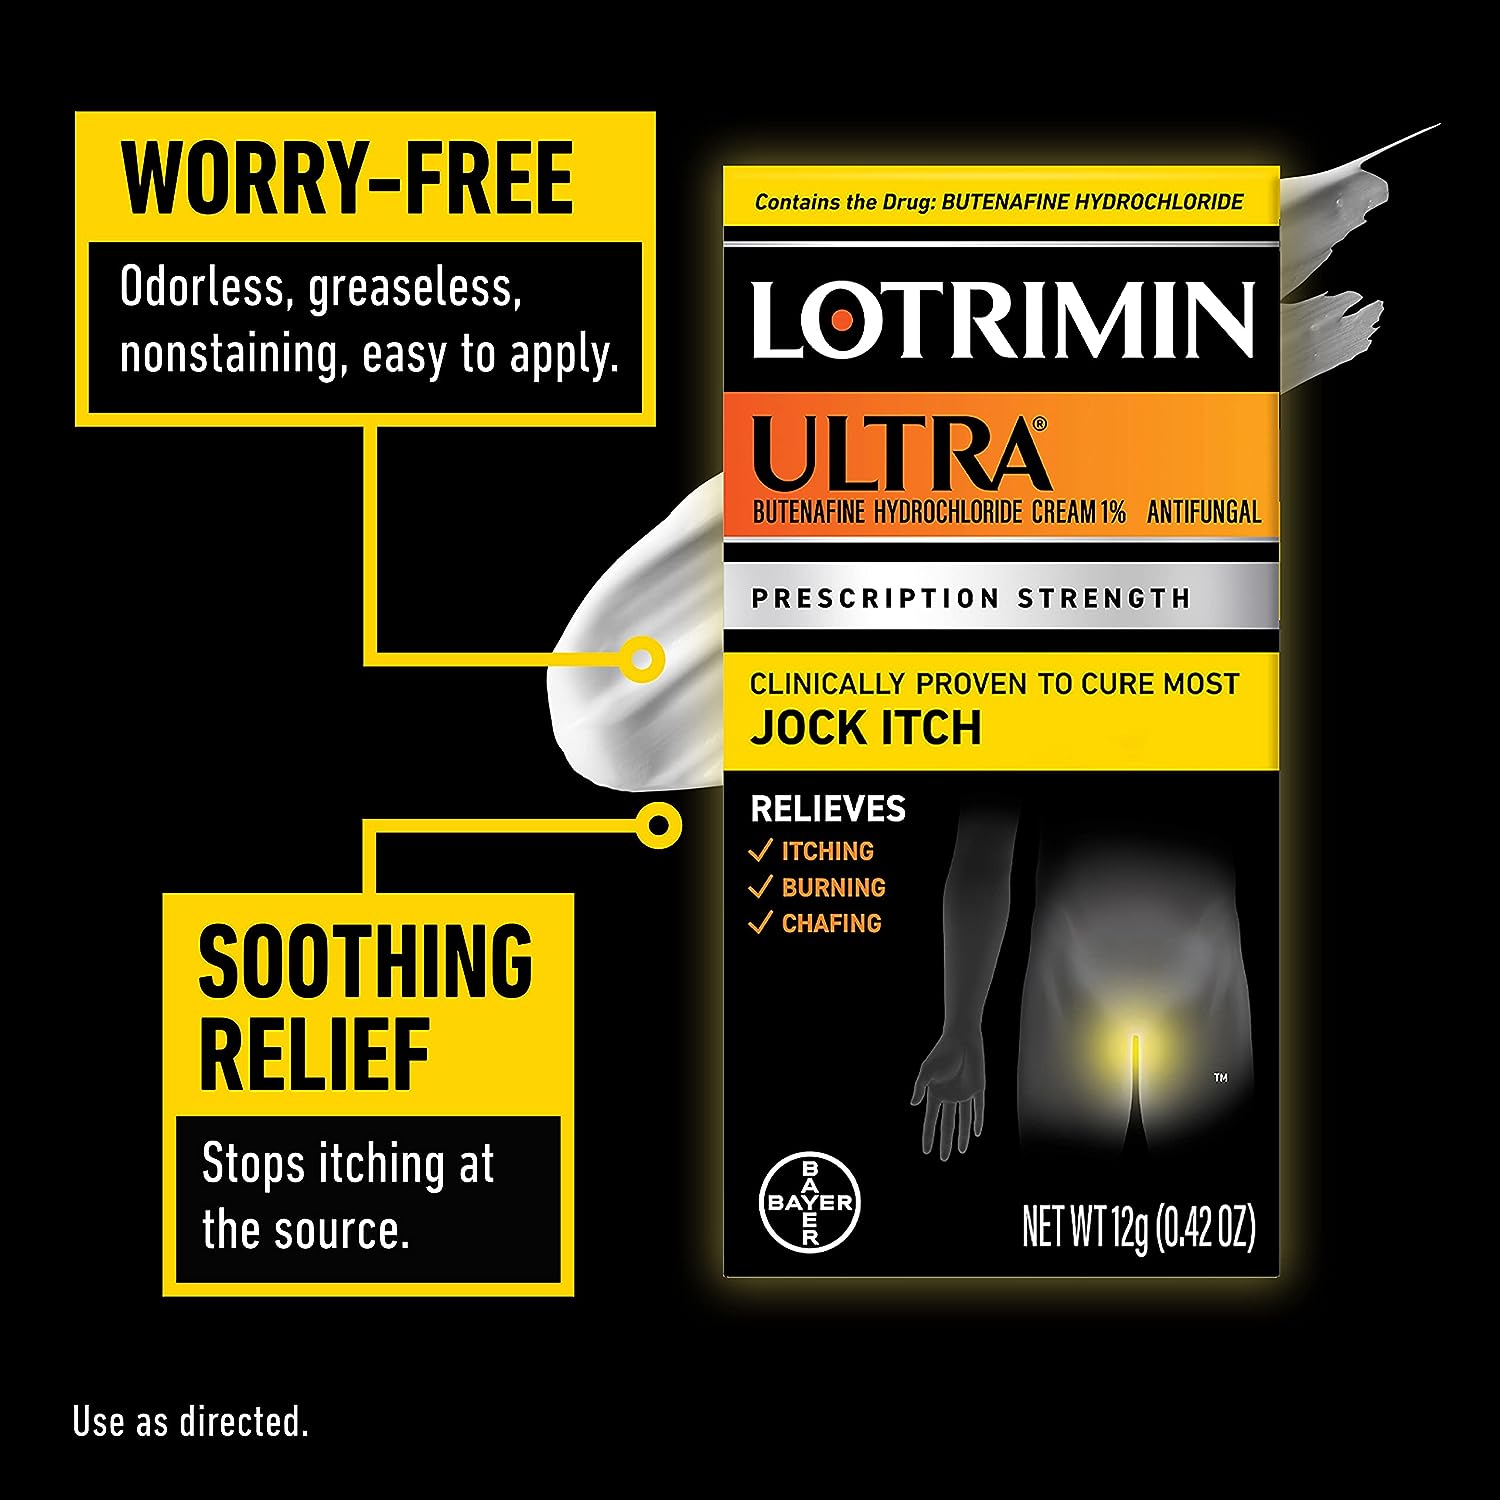 Lotrimin Ultra Antifungal Jock Itch Cream - Powerful Butenafine Hydrochloride Treatment for Jock Itch and Fungal Infections, 0.42 Ounce (12 Grams) (Packaging May Vary)